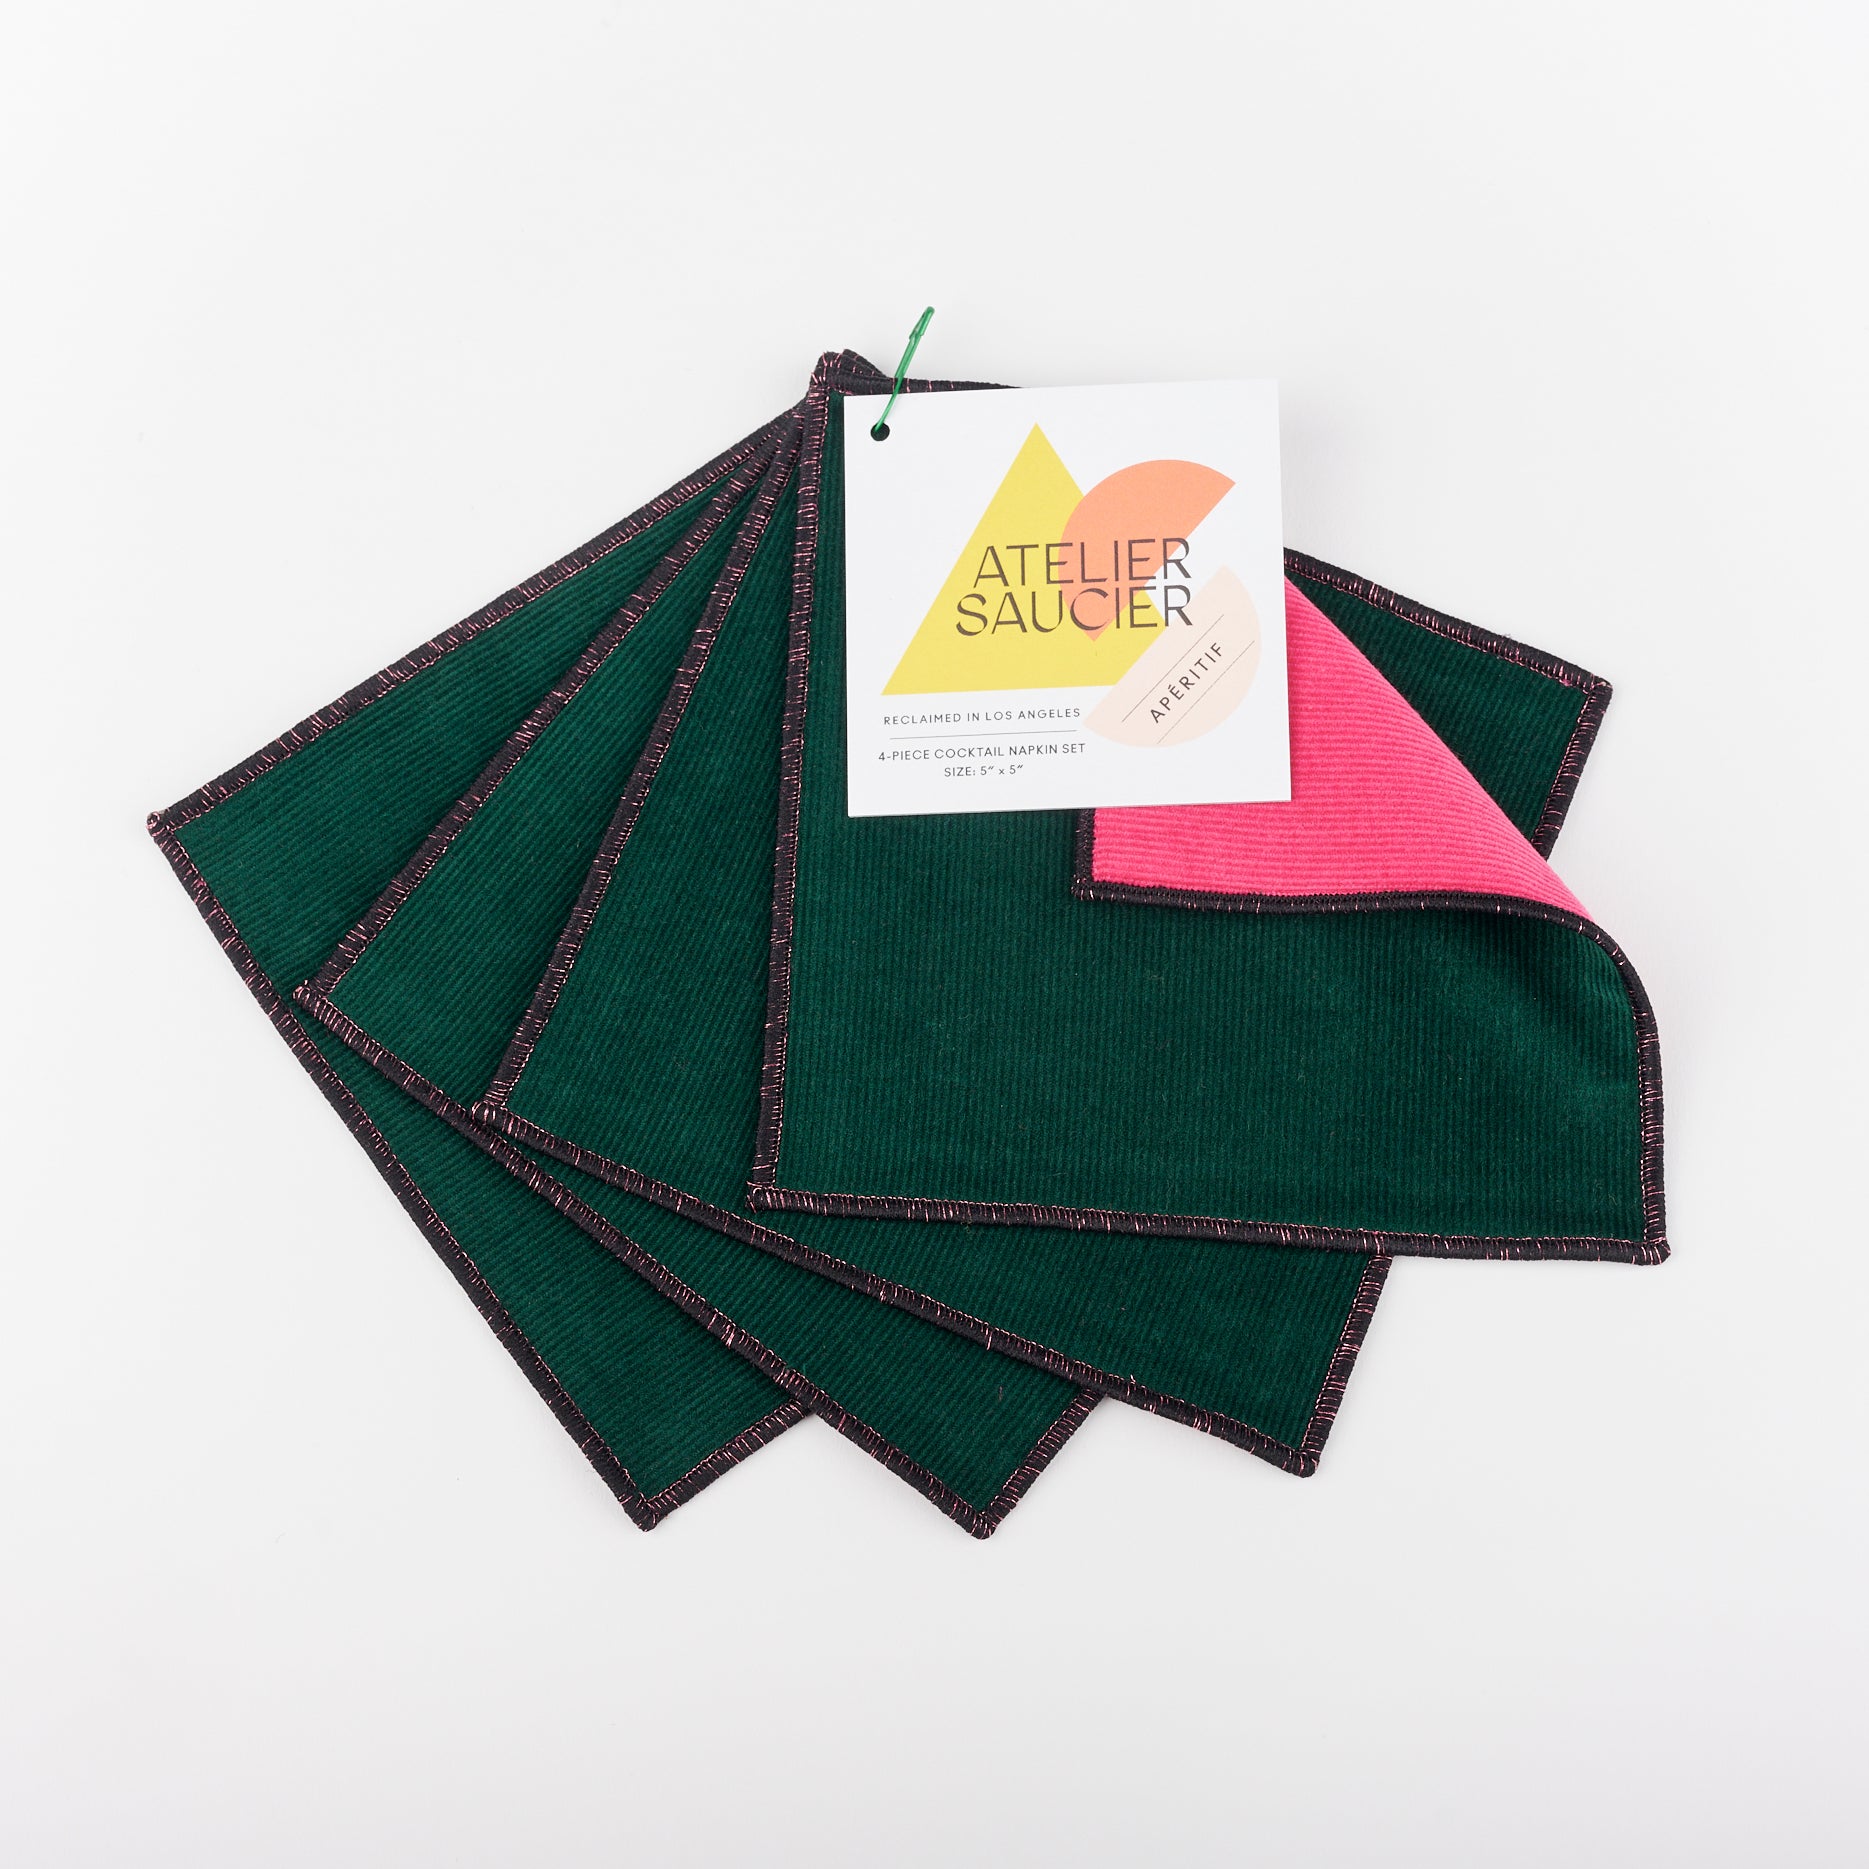 Cocktail napkin set by Atelier Saucier - one side dark green and the other side light hot pink with metallic edges